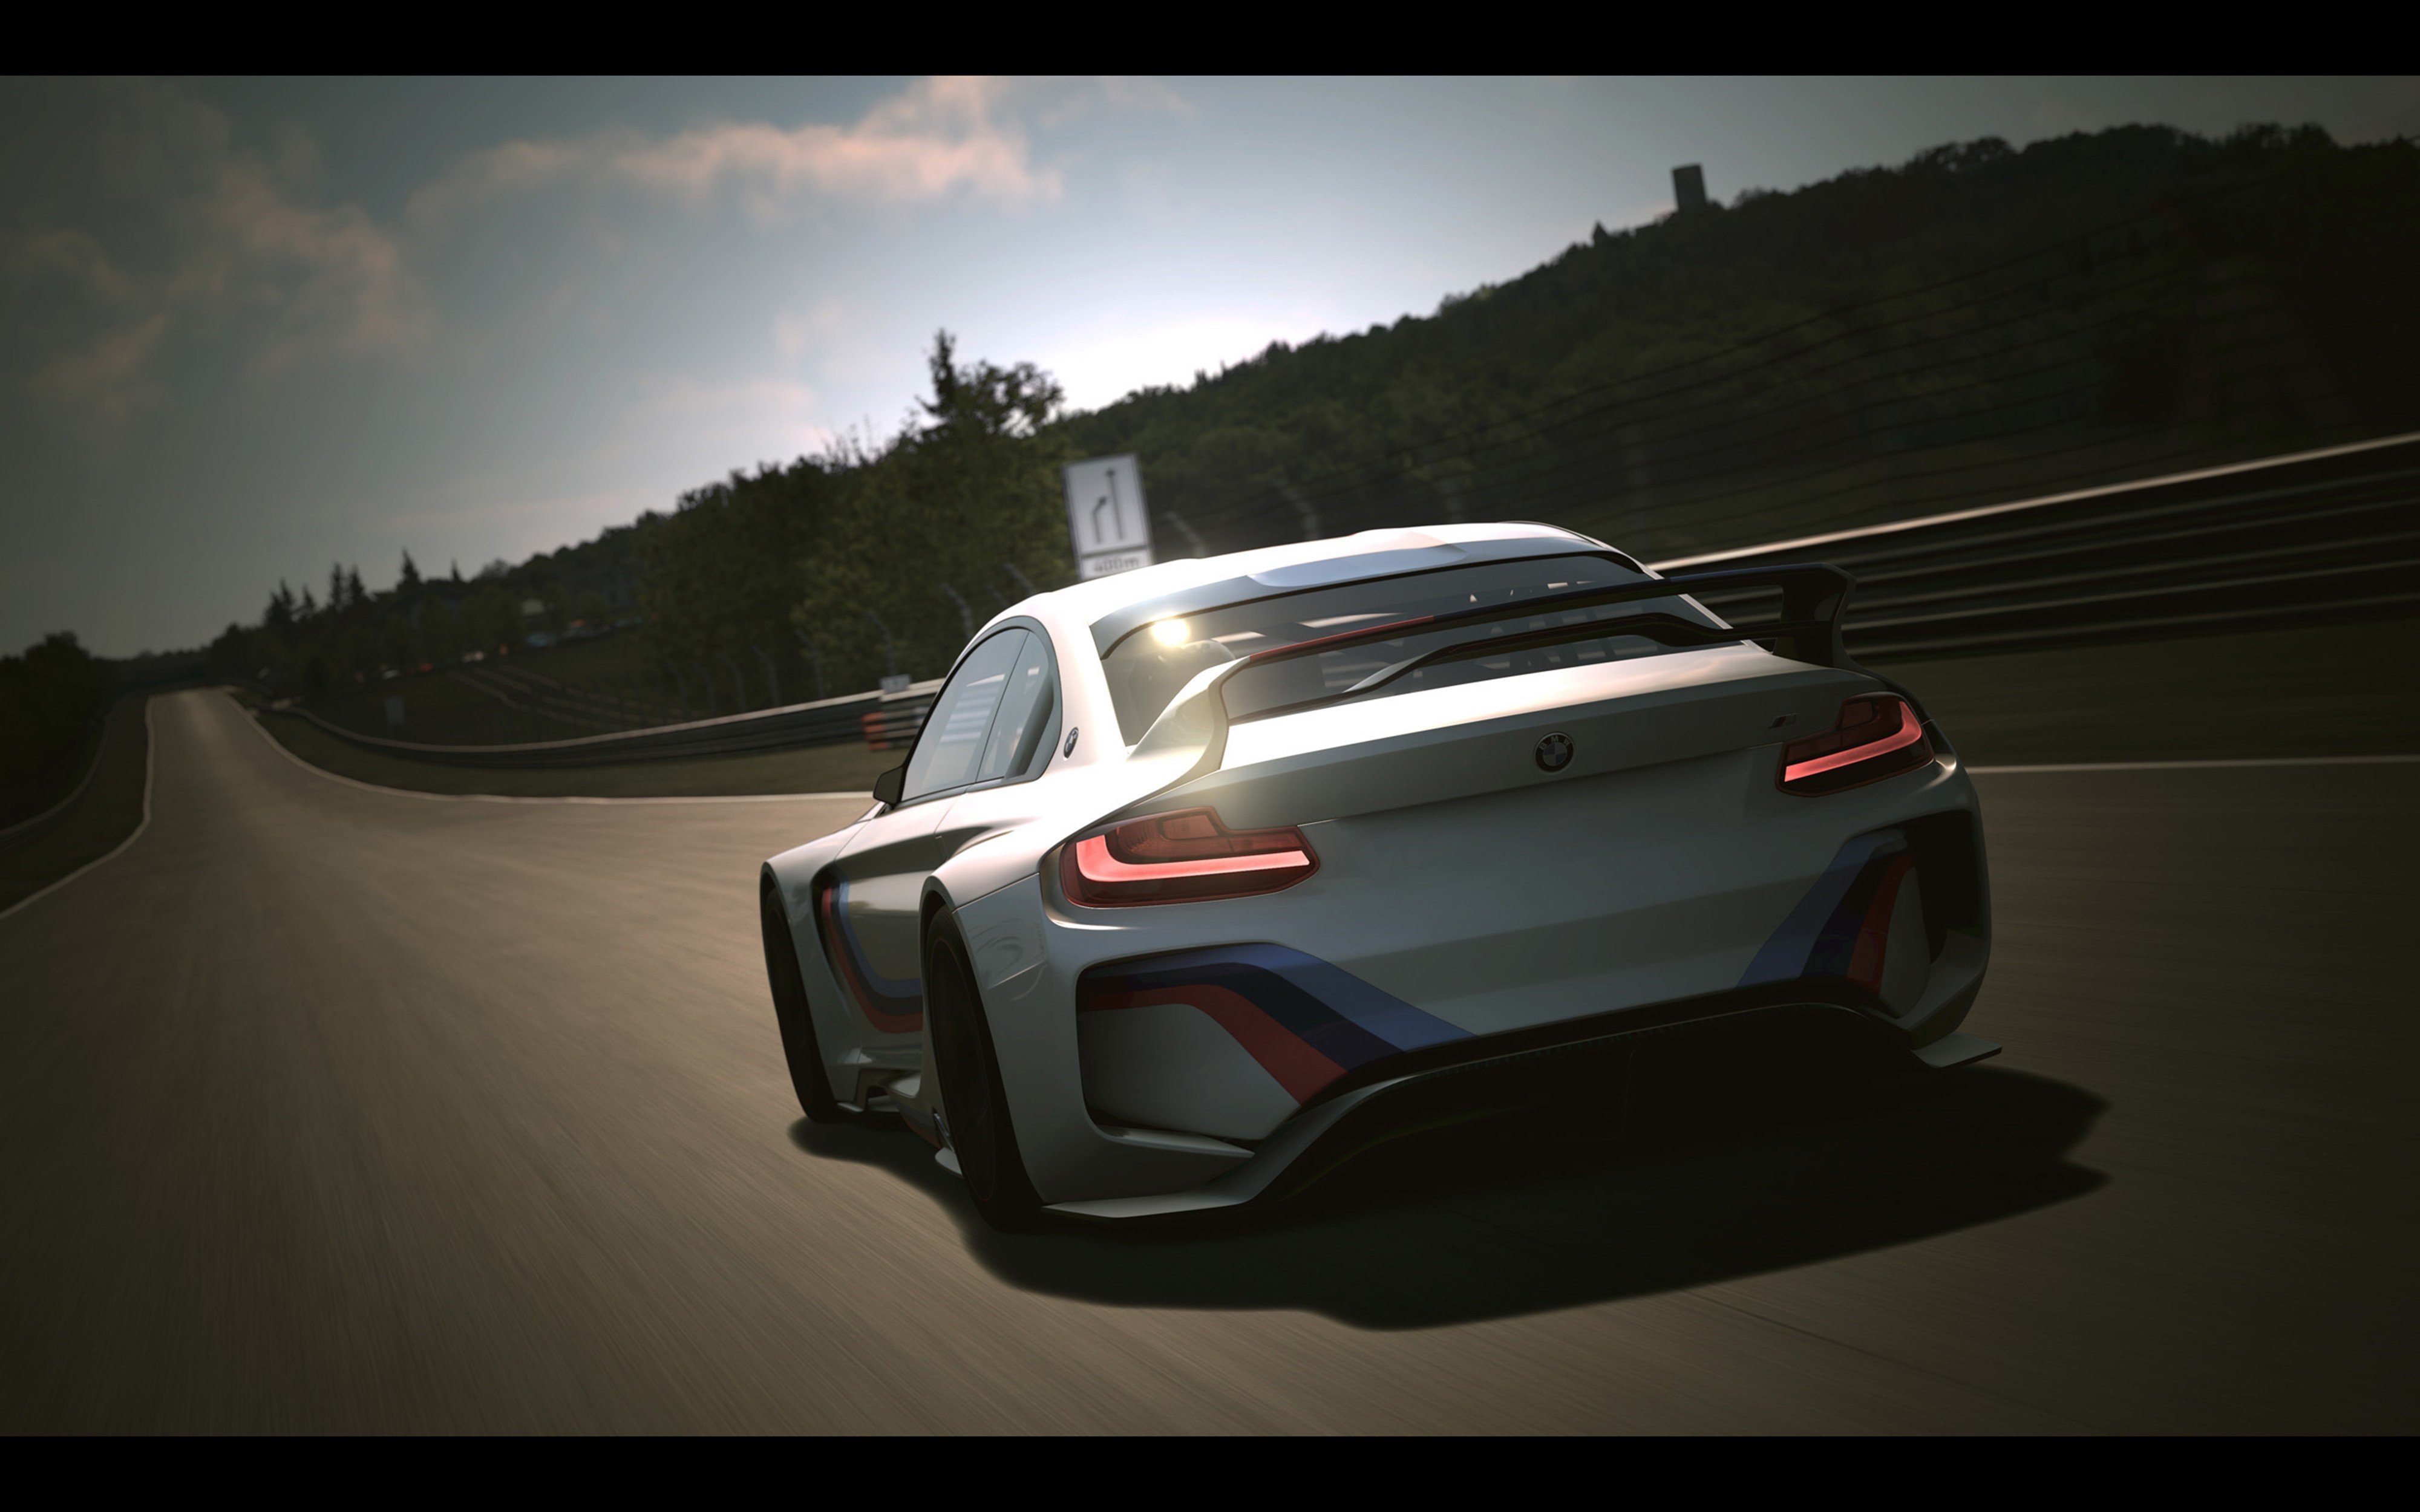 2014, Bmw, Vision, Gran turismo, Concept, Race, Car, Game, Vehicle, Racing, Germany, 4000x2500,  5 Wallpaper